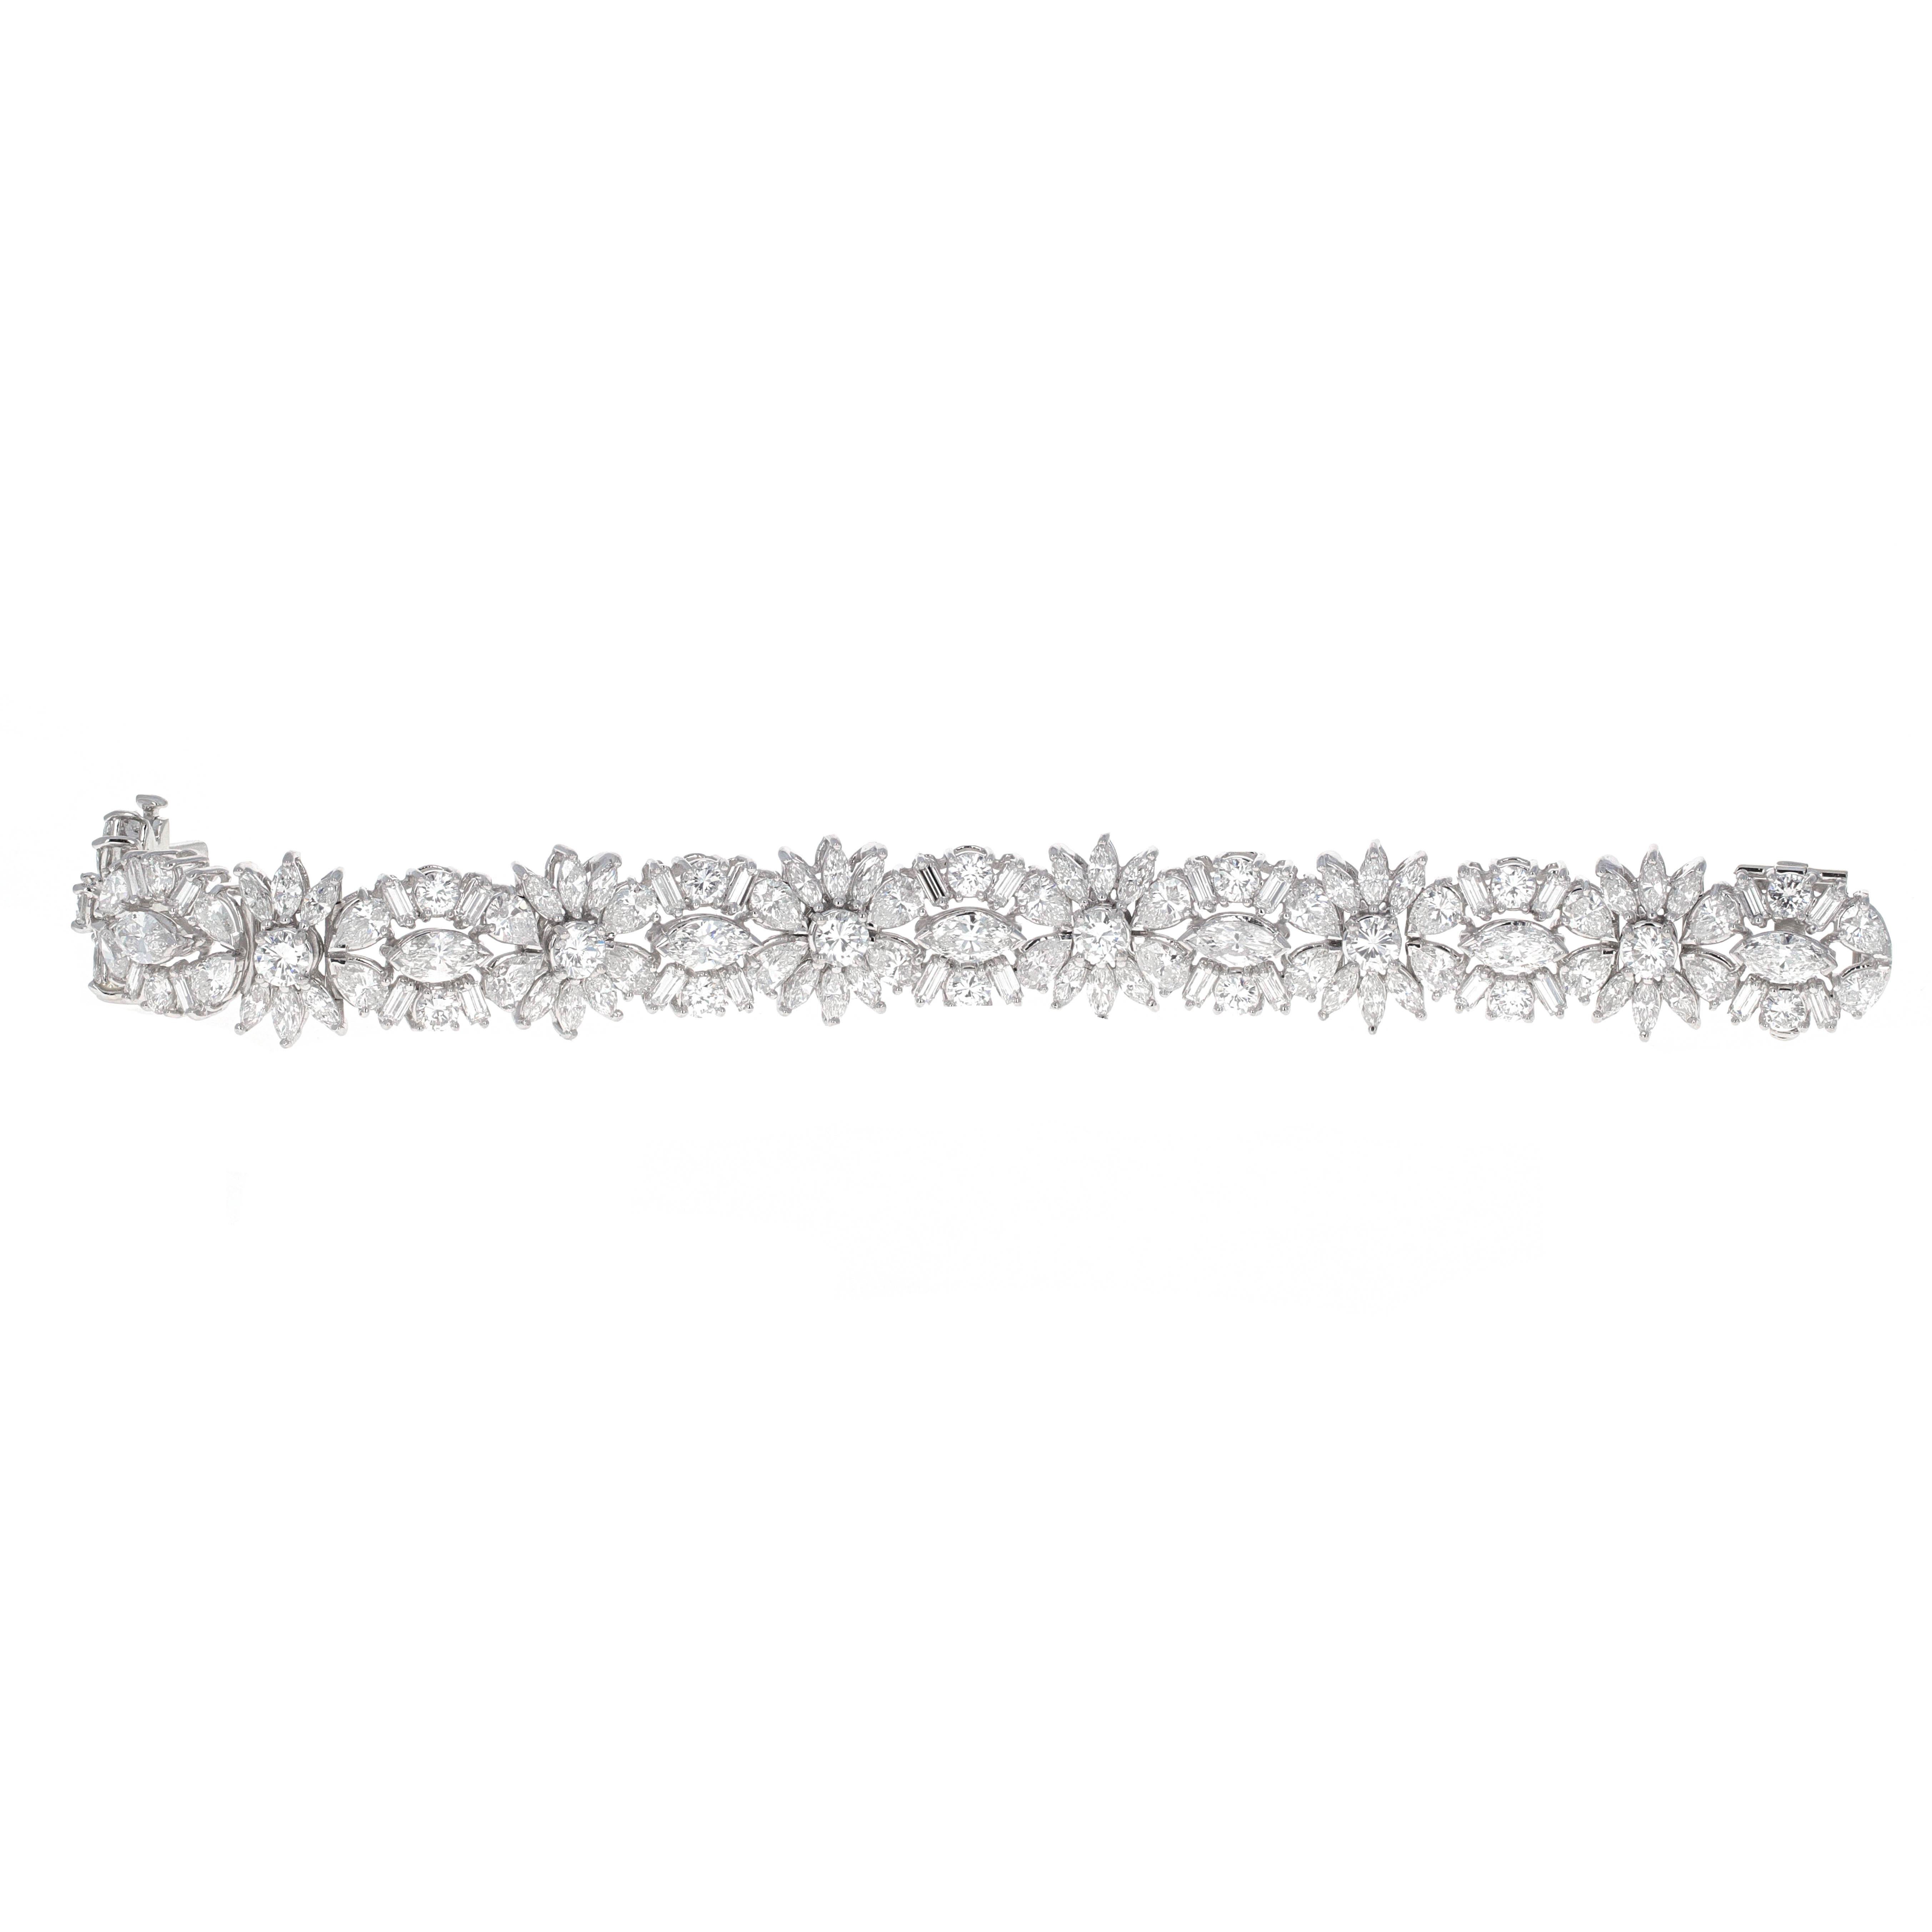 Beautiful estate 18 karat white gold fancy shape diamond tennis bracelet. The bracelet has 126 white diamonds weighing an estimated 18.00 carats total weight. The diamonds are round brilliant, marquise, pear and baguette shaped. 

The bracelet is in